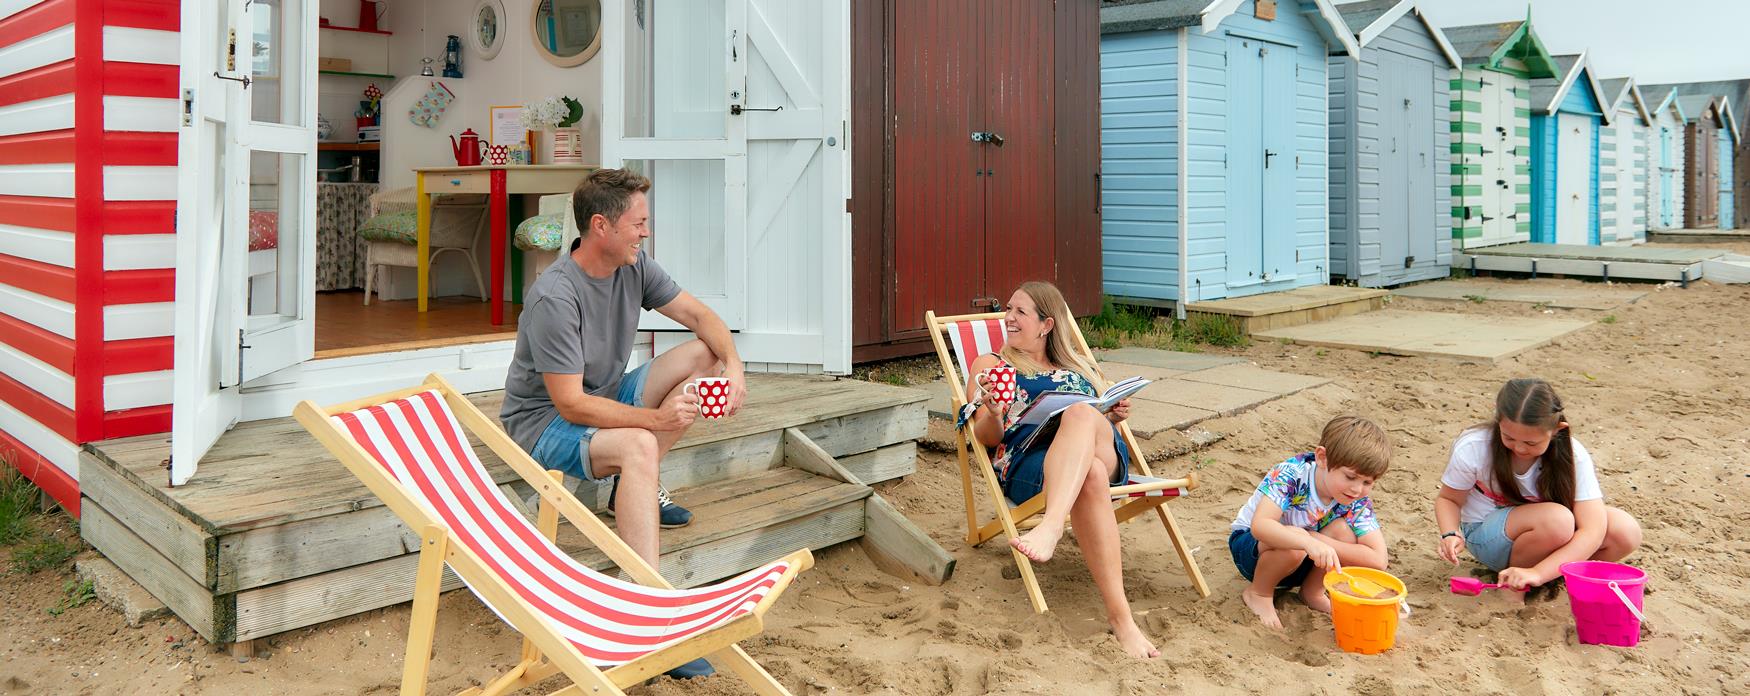 Family sitting outside red beach hut at Mersea island